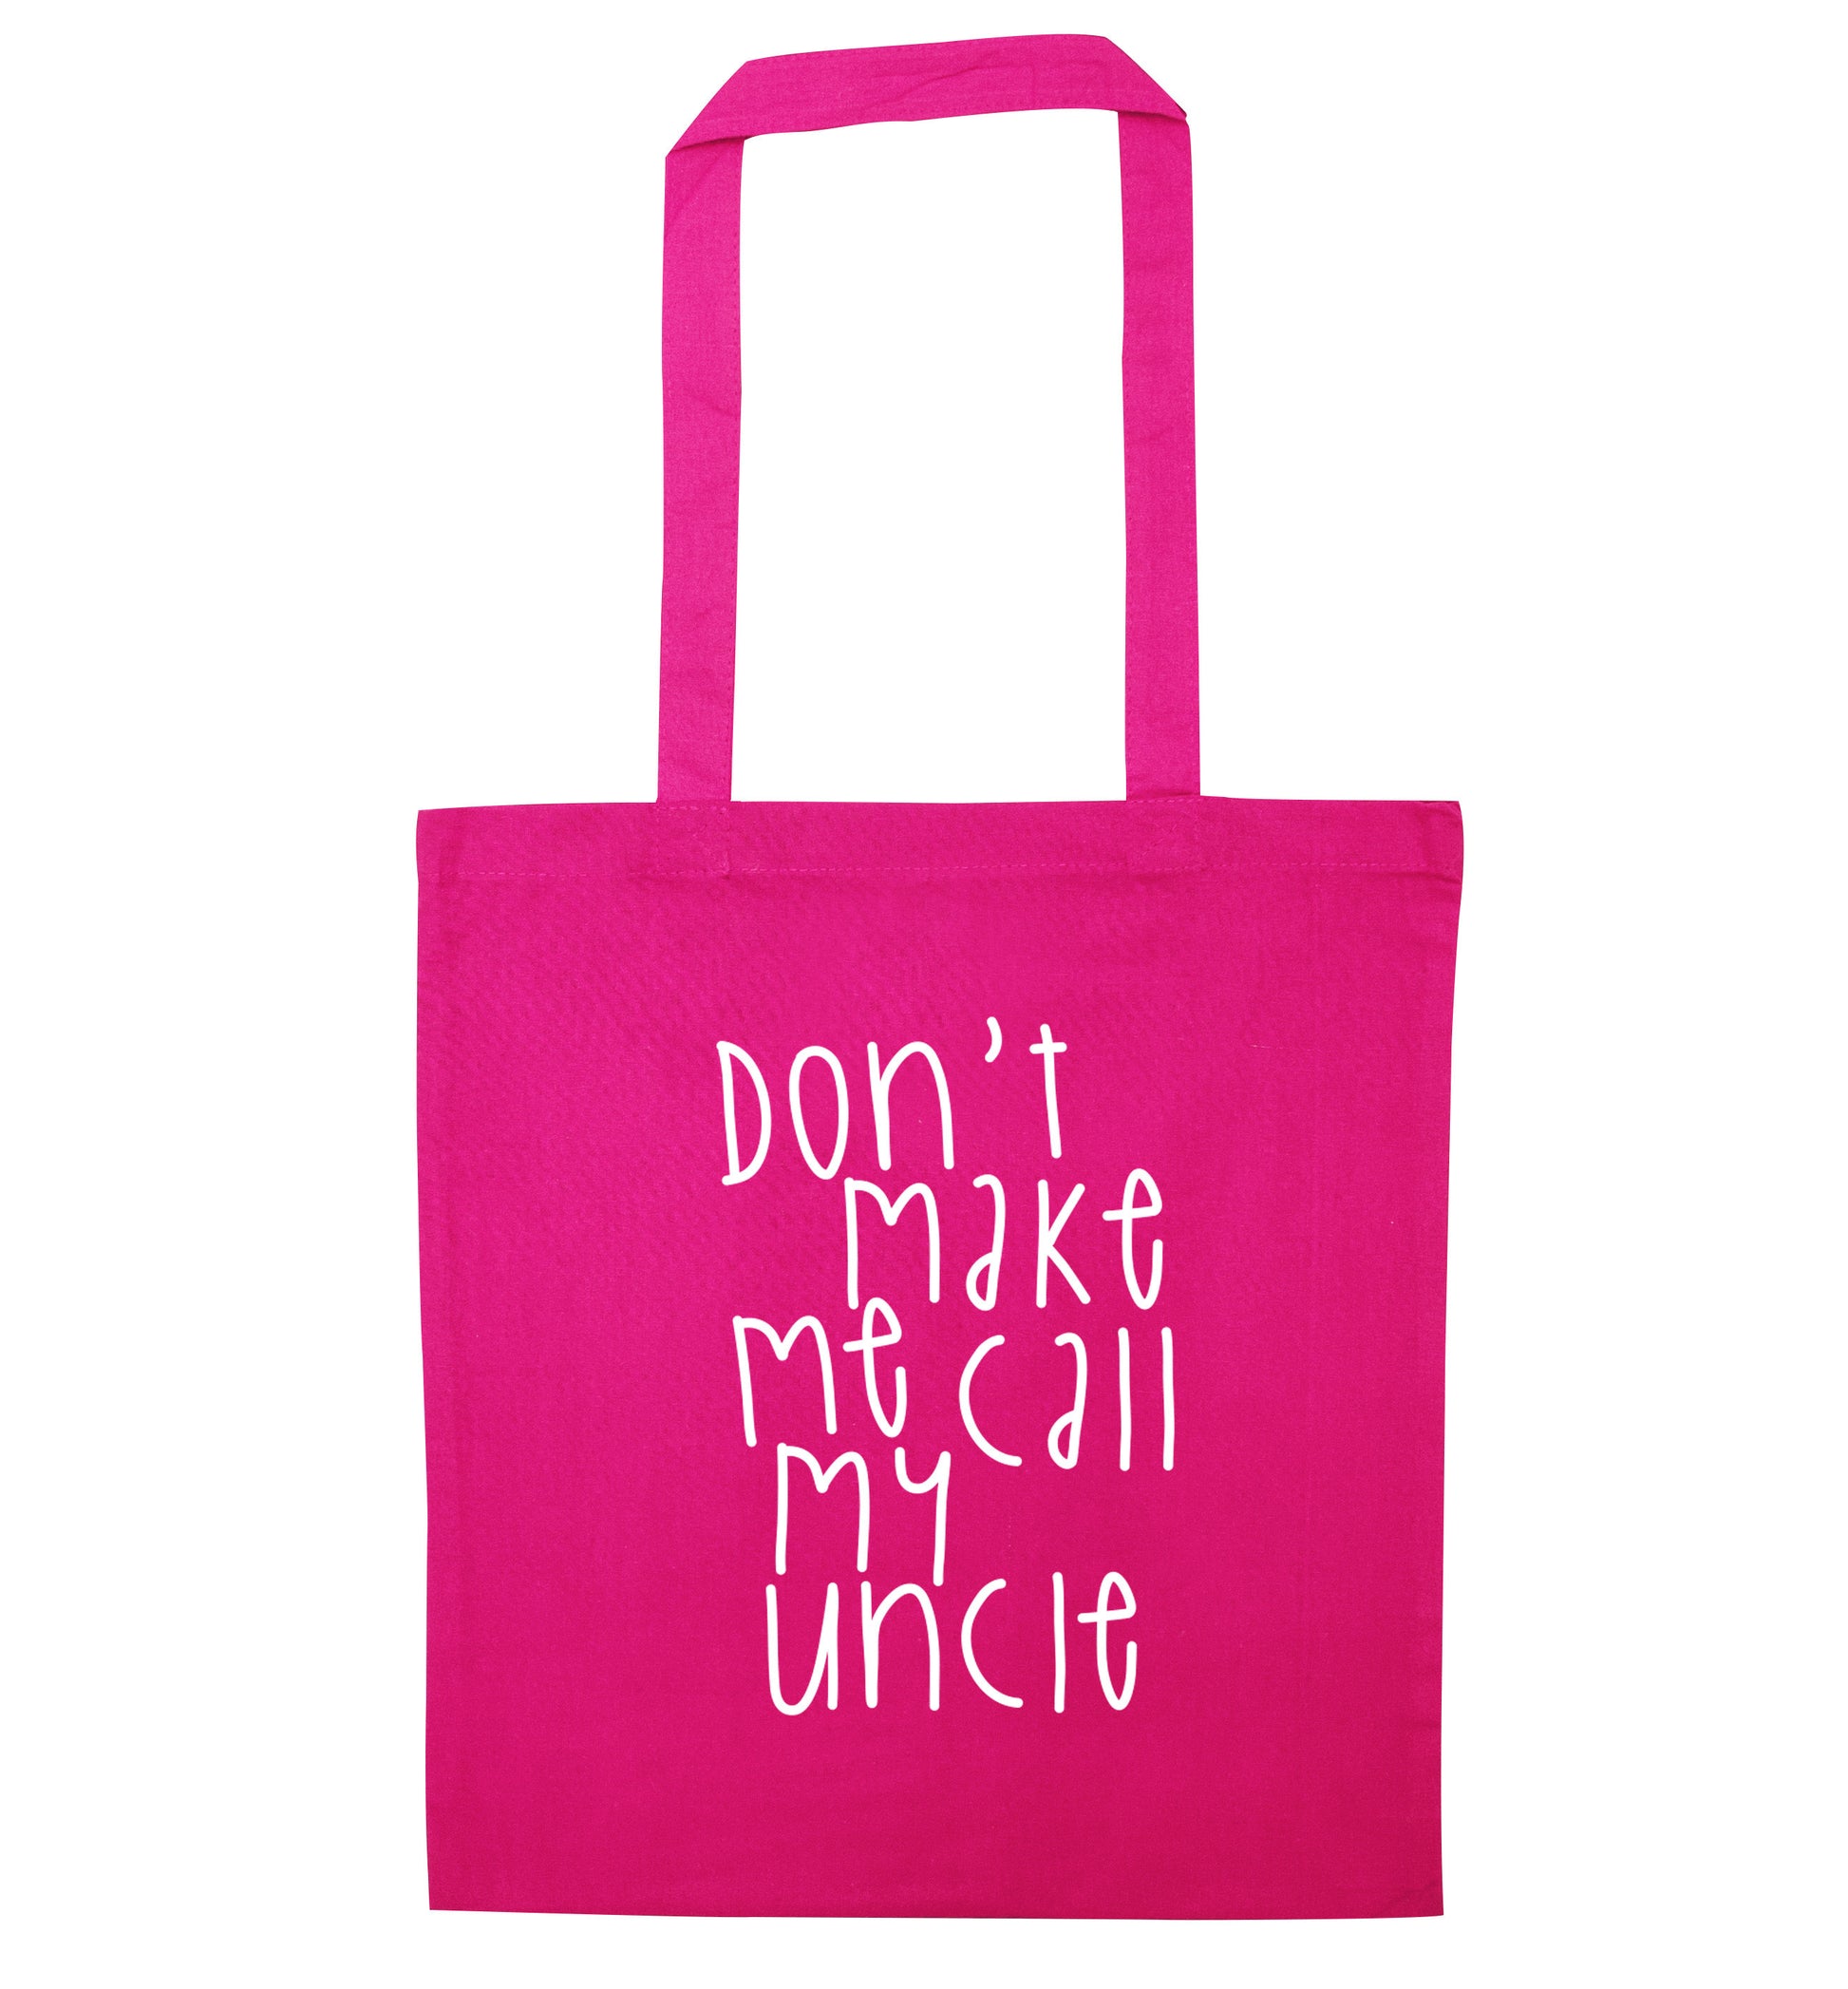 Don't make me call my uncle pink tote bag